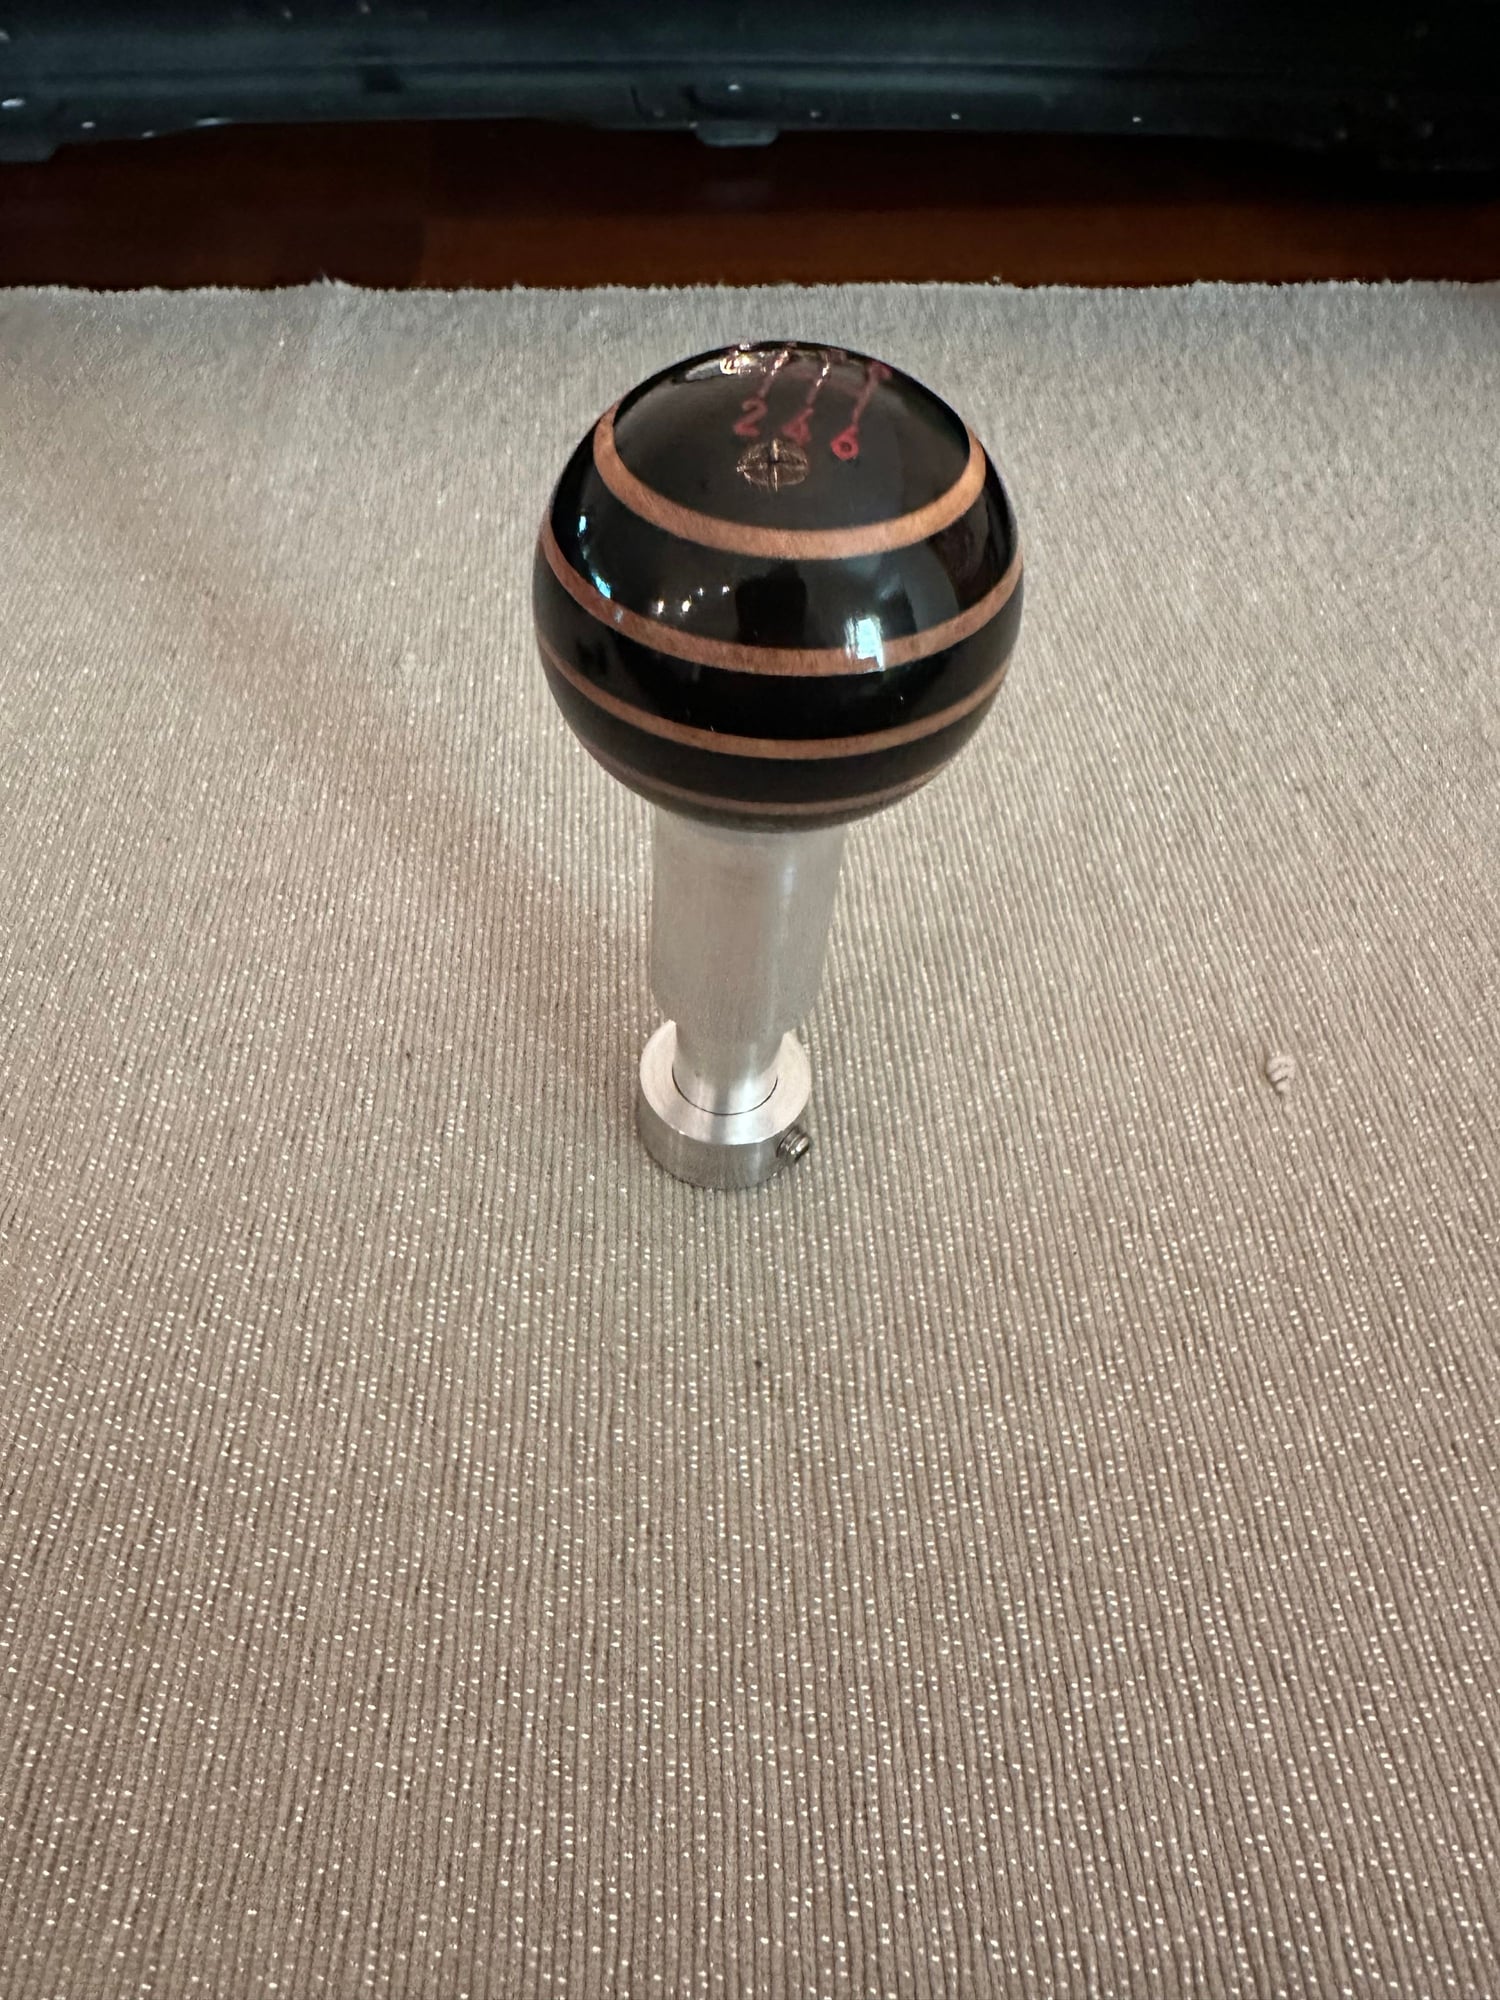 Accessories - 992 Turbo Carbon Wing / RYFT race cats / Shift knob gt3 - Used - All Years  All Models - Naples, FL 34109, United States